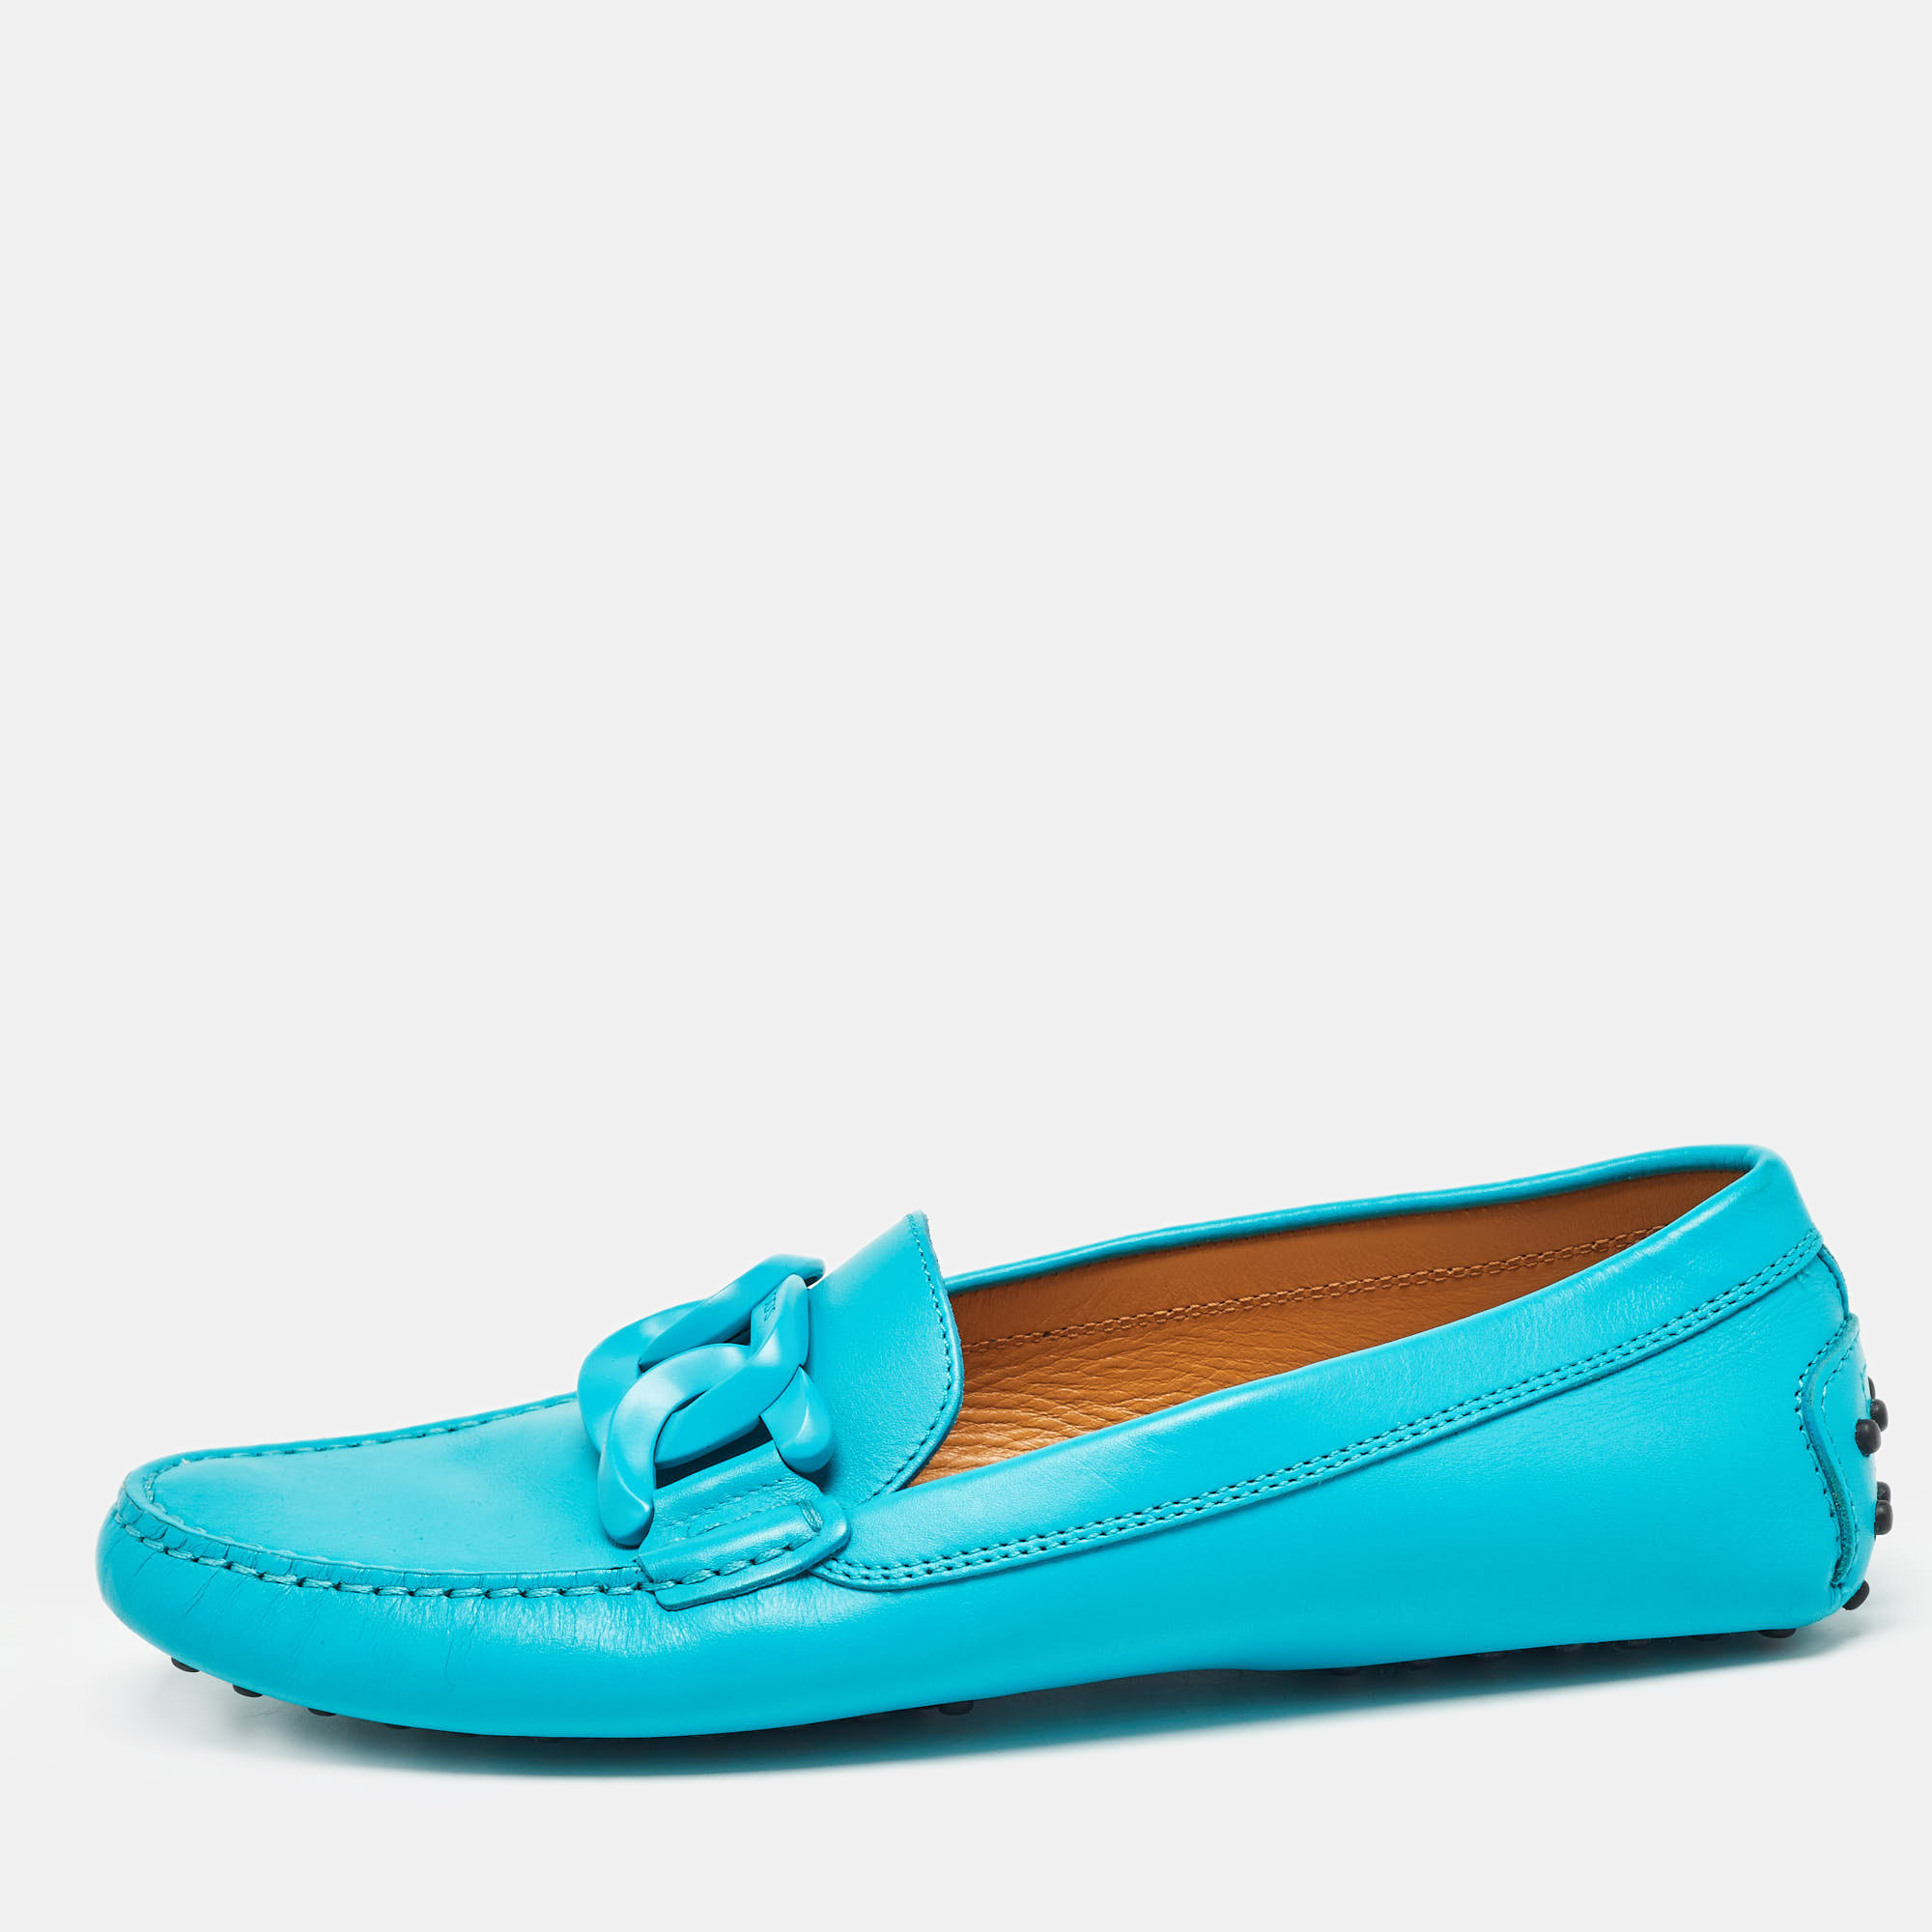 Tod's blue leather chain detail slip on loafers size 39